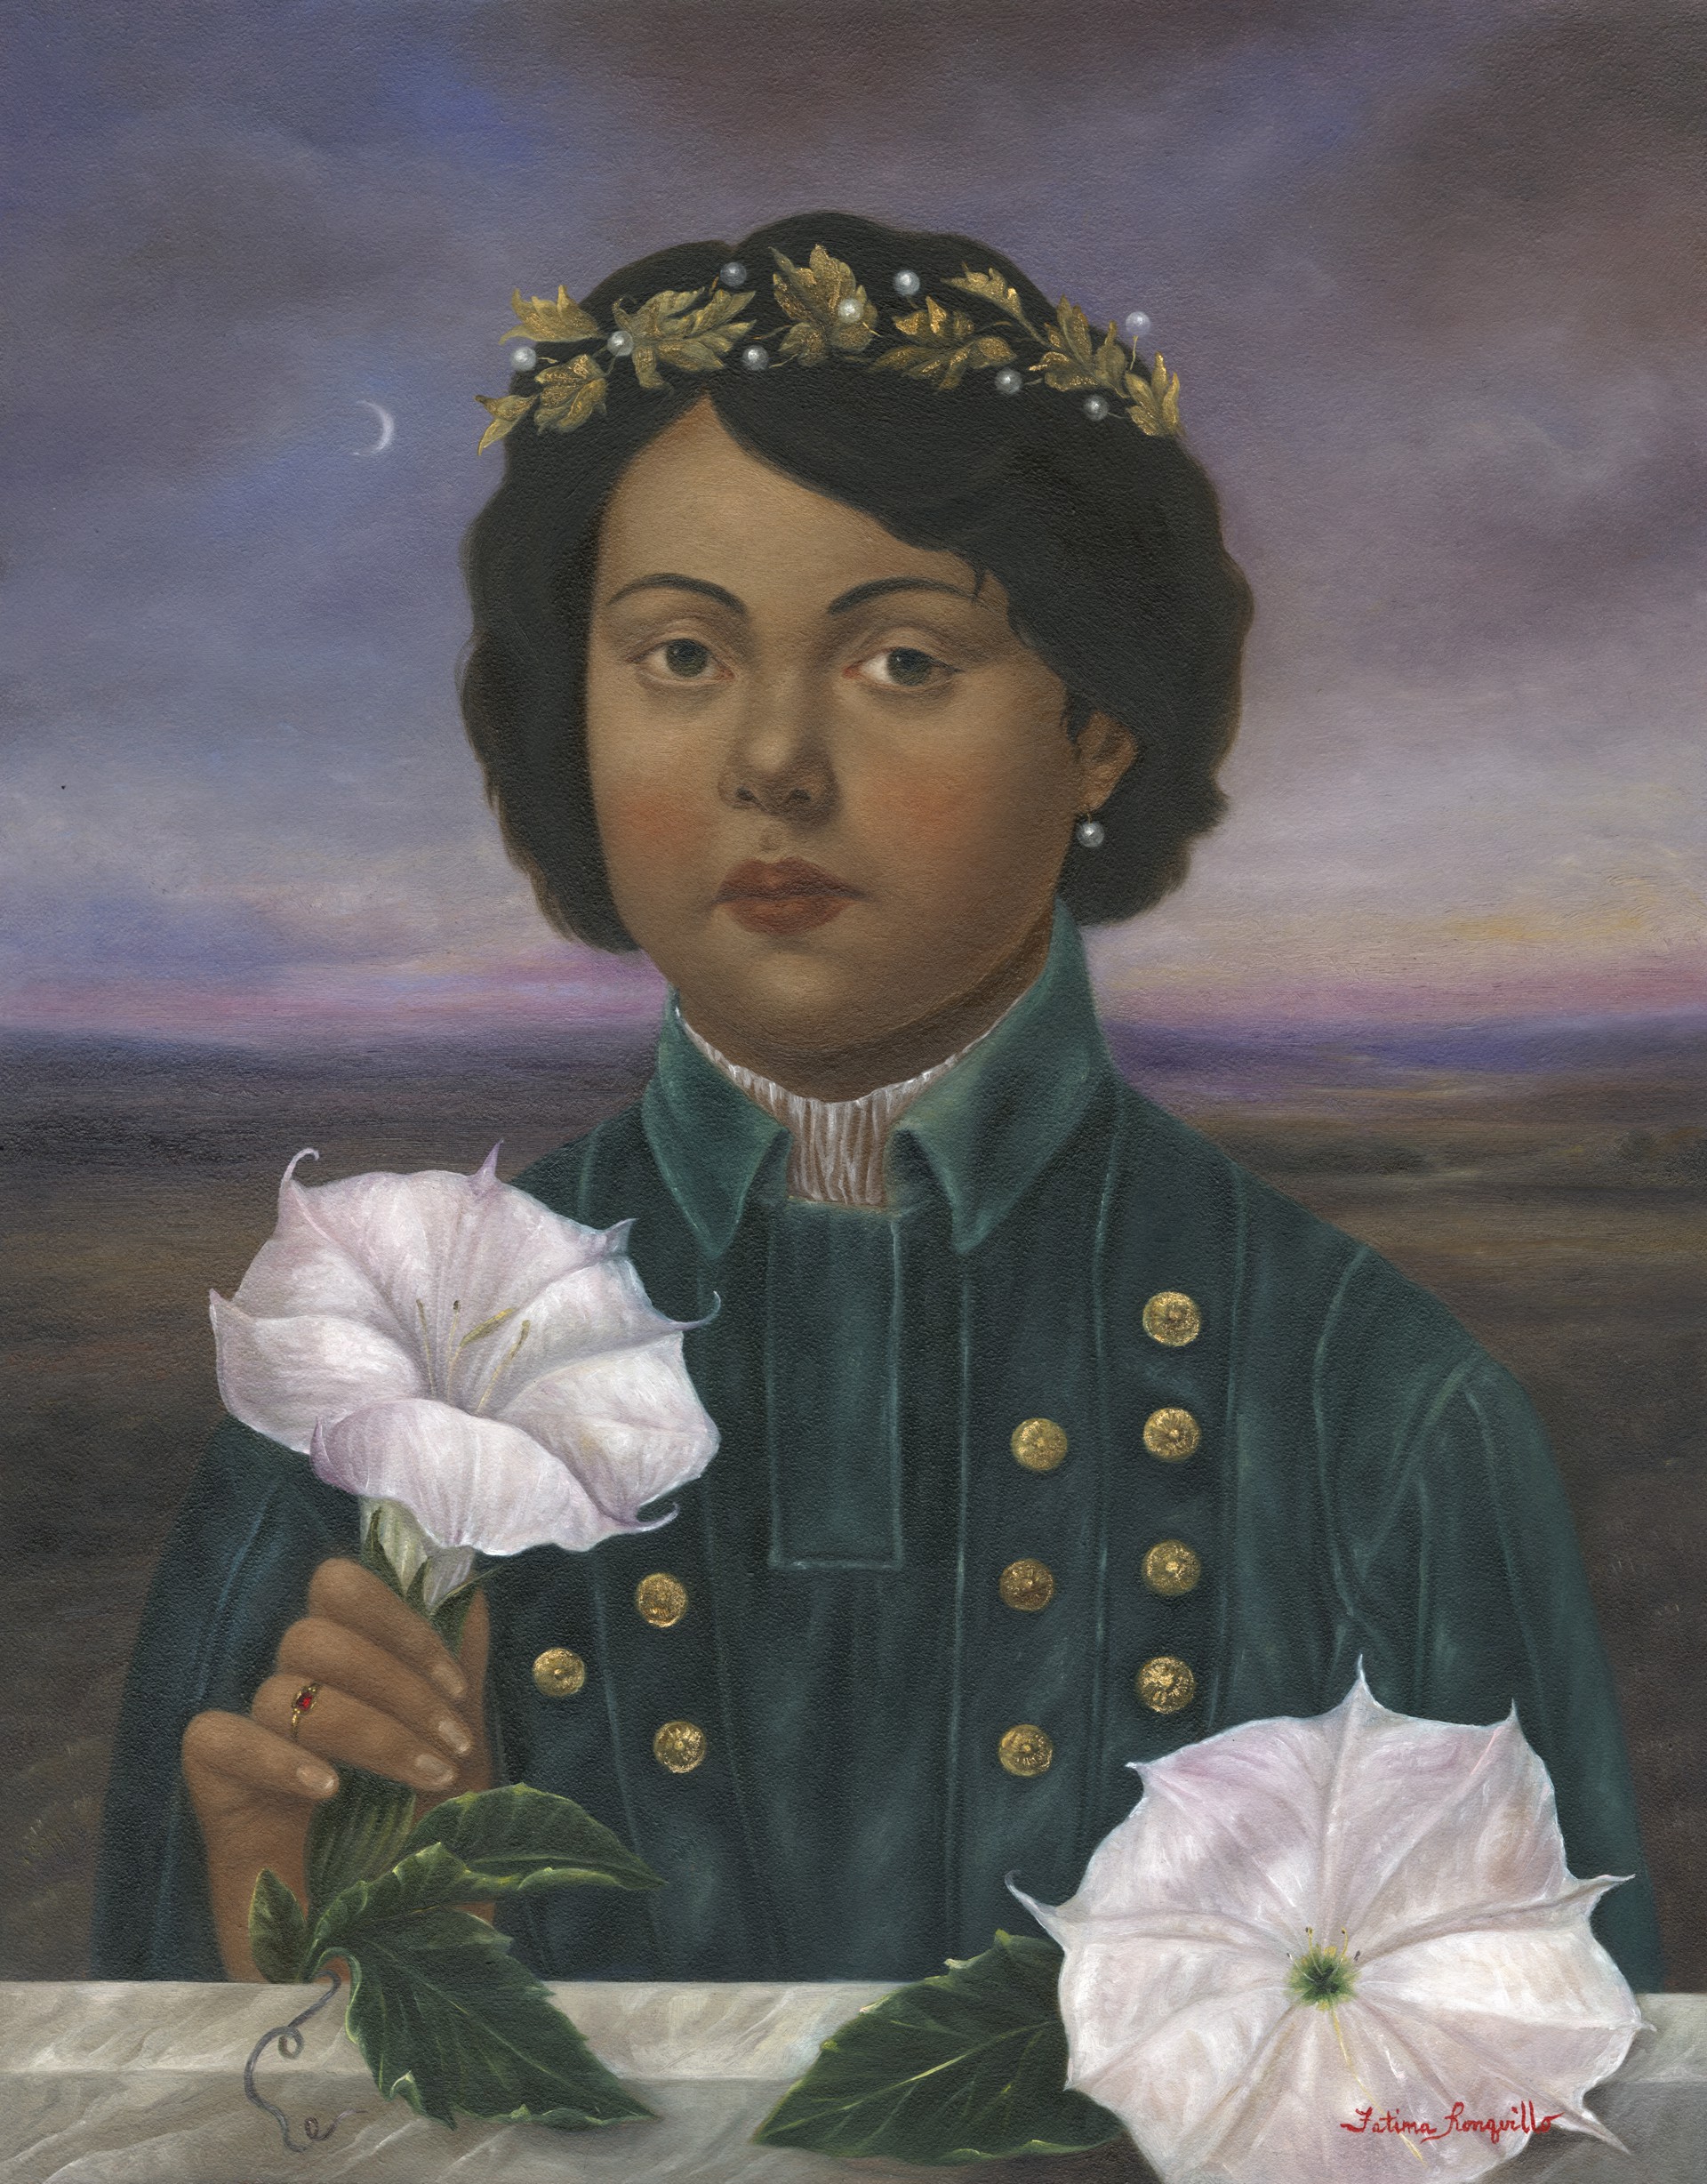 Girl with Moonflowers by Fatima Ronquillo